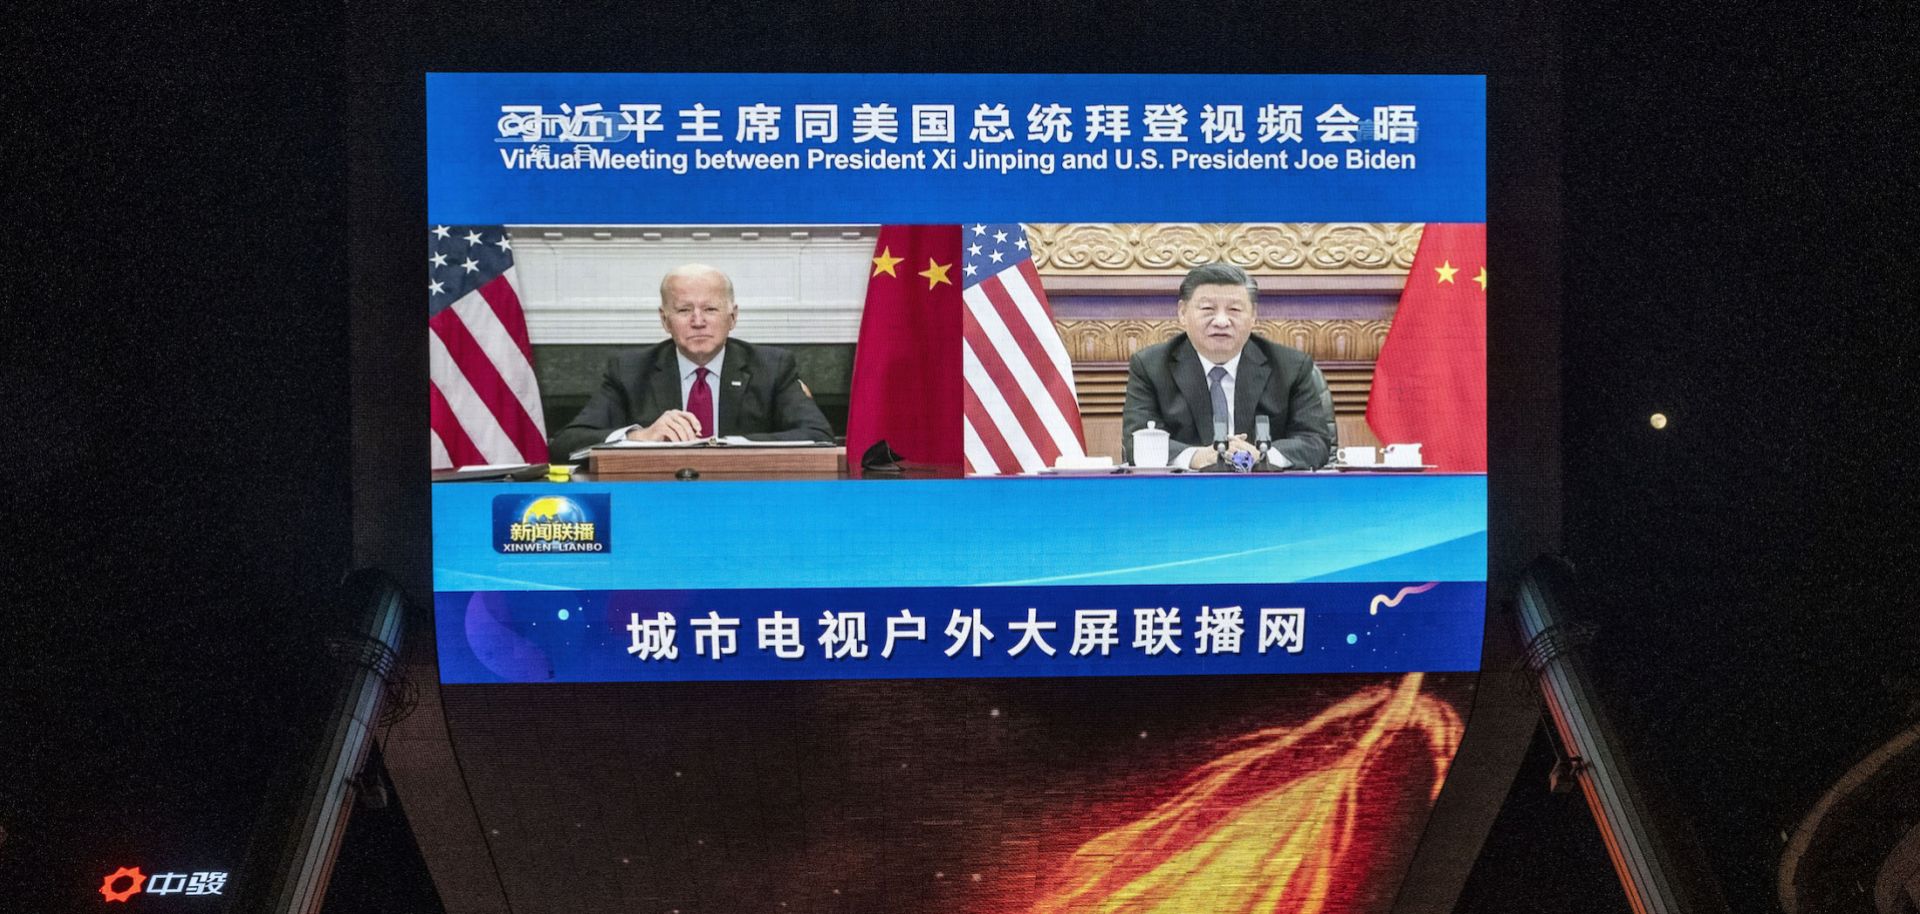 A large screen in Beijing, China, displays a CCTV news broadcast of U.S. President Joe Biden (left) and Chinese President Xi Jinping's virtual summit on Nov. 16, 2021.